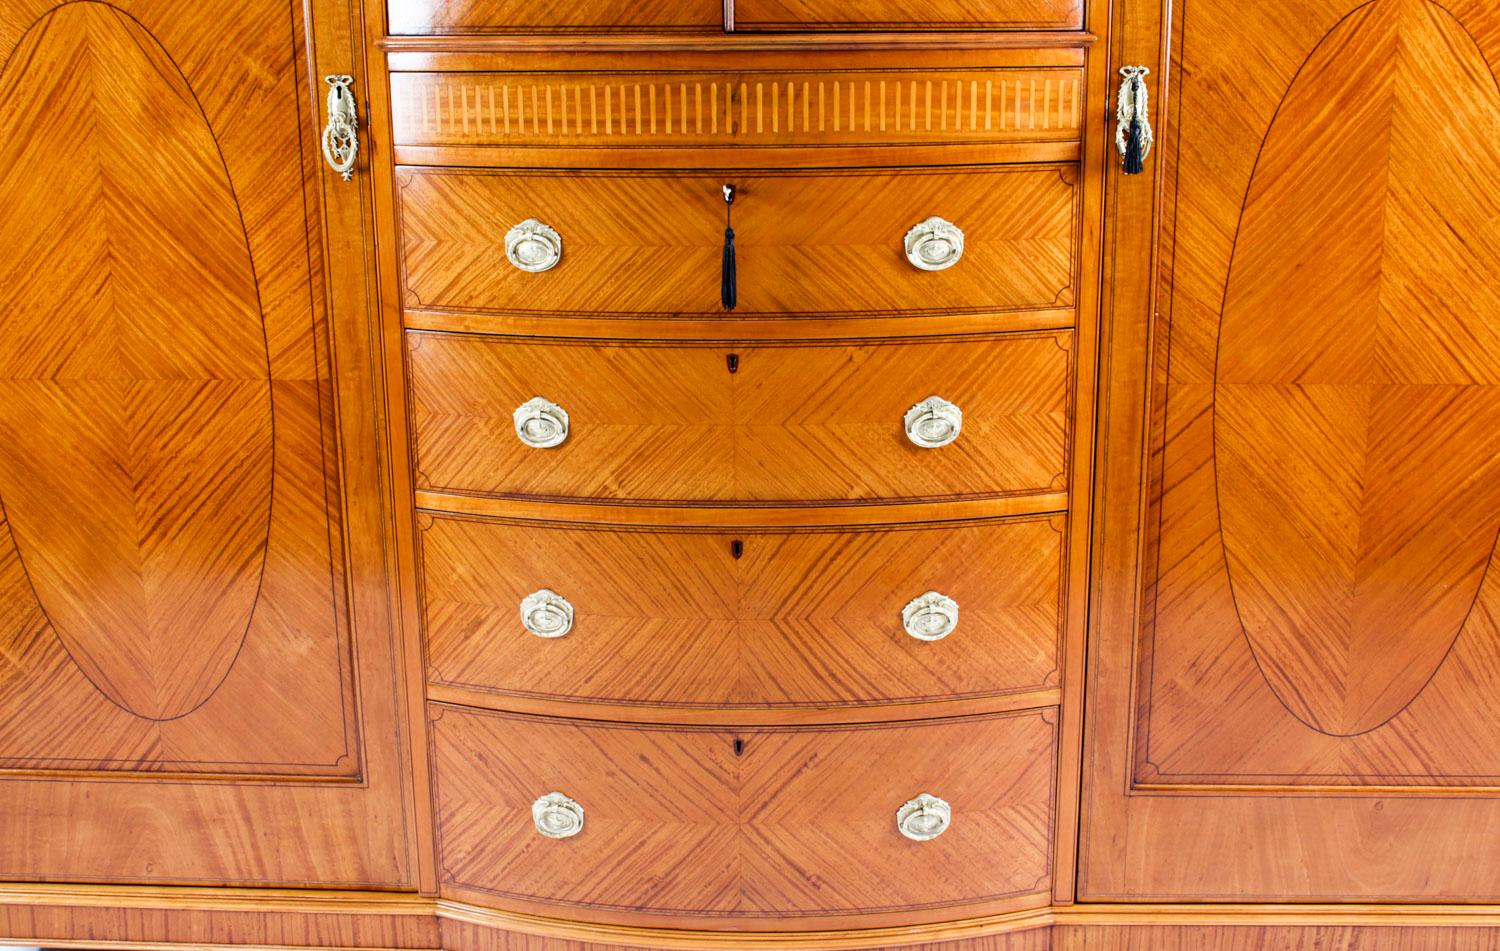 This is a large and impressive English antique Victorian Sheraton Revival satinwood inlaid wardrobe, circa 1880 in date.
 
The central section has a pair of cupboard panelled doors opening to a central shelf above five graduated drawers with a